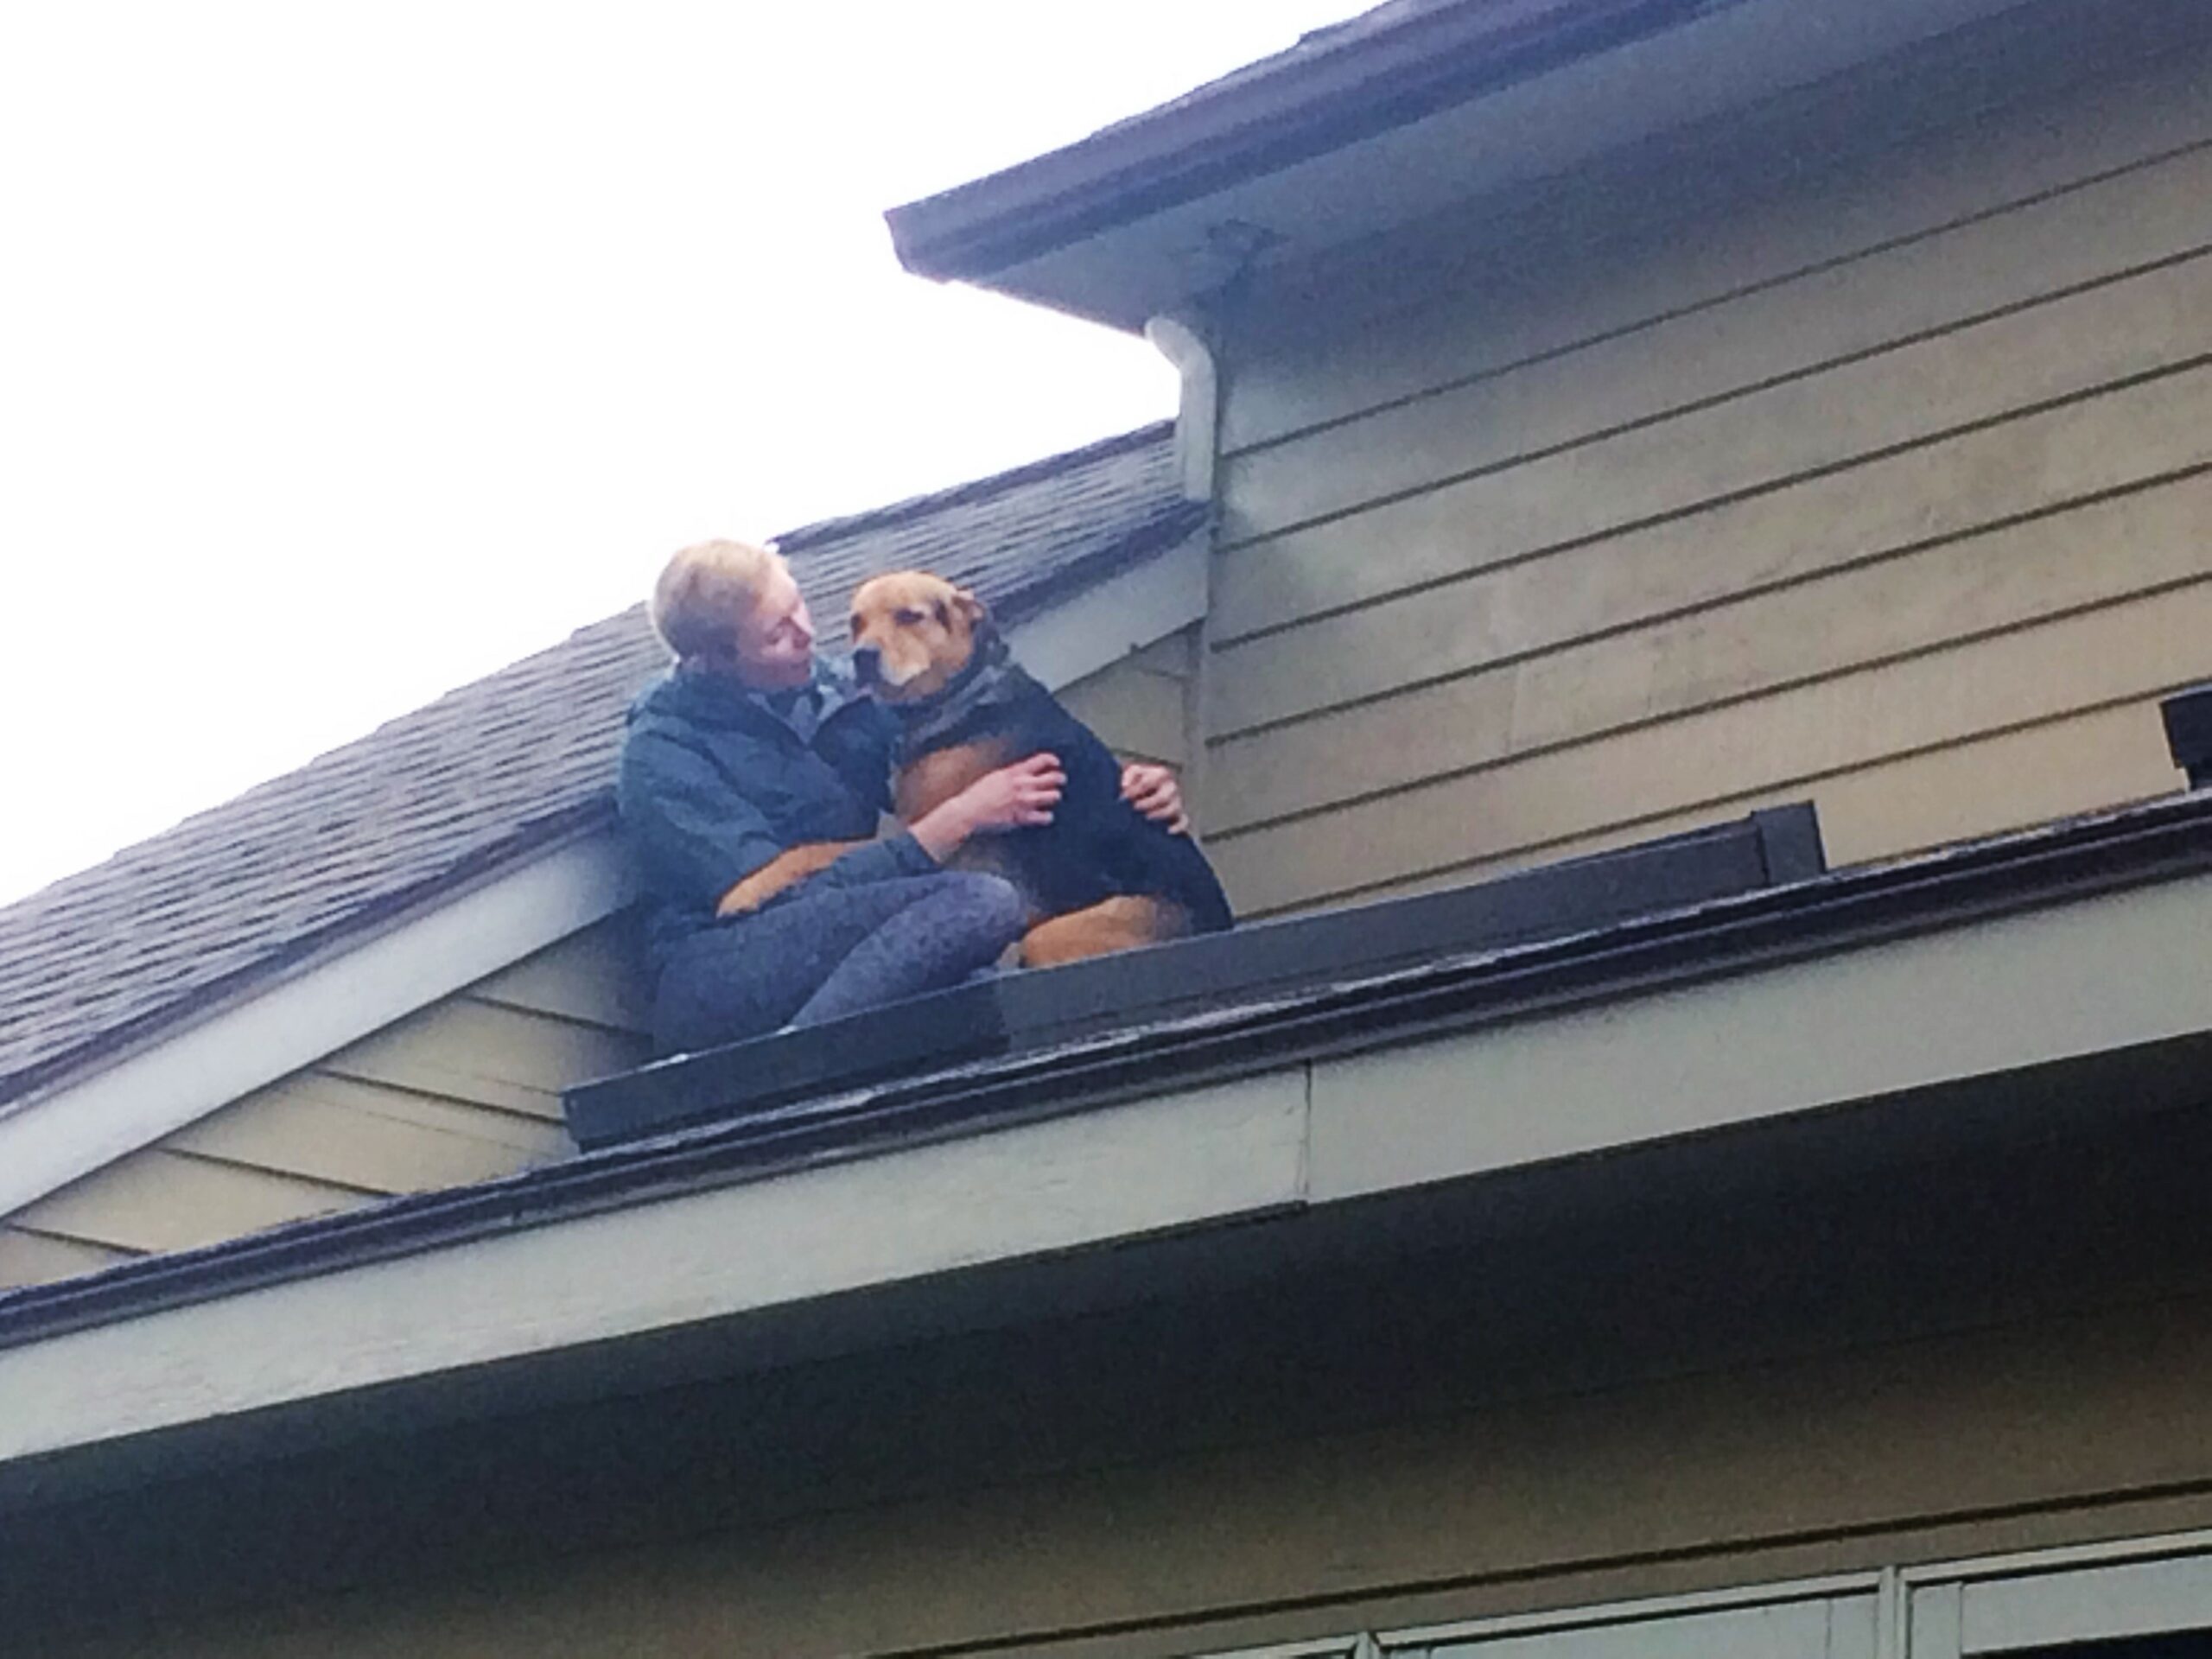 woman comforts dog who got stuck on porch roof after escaping through upstairs window.